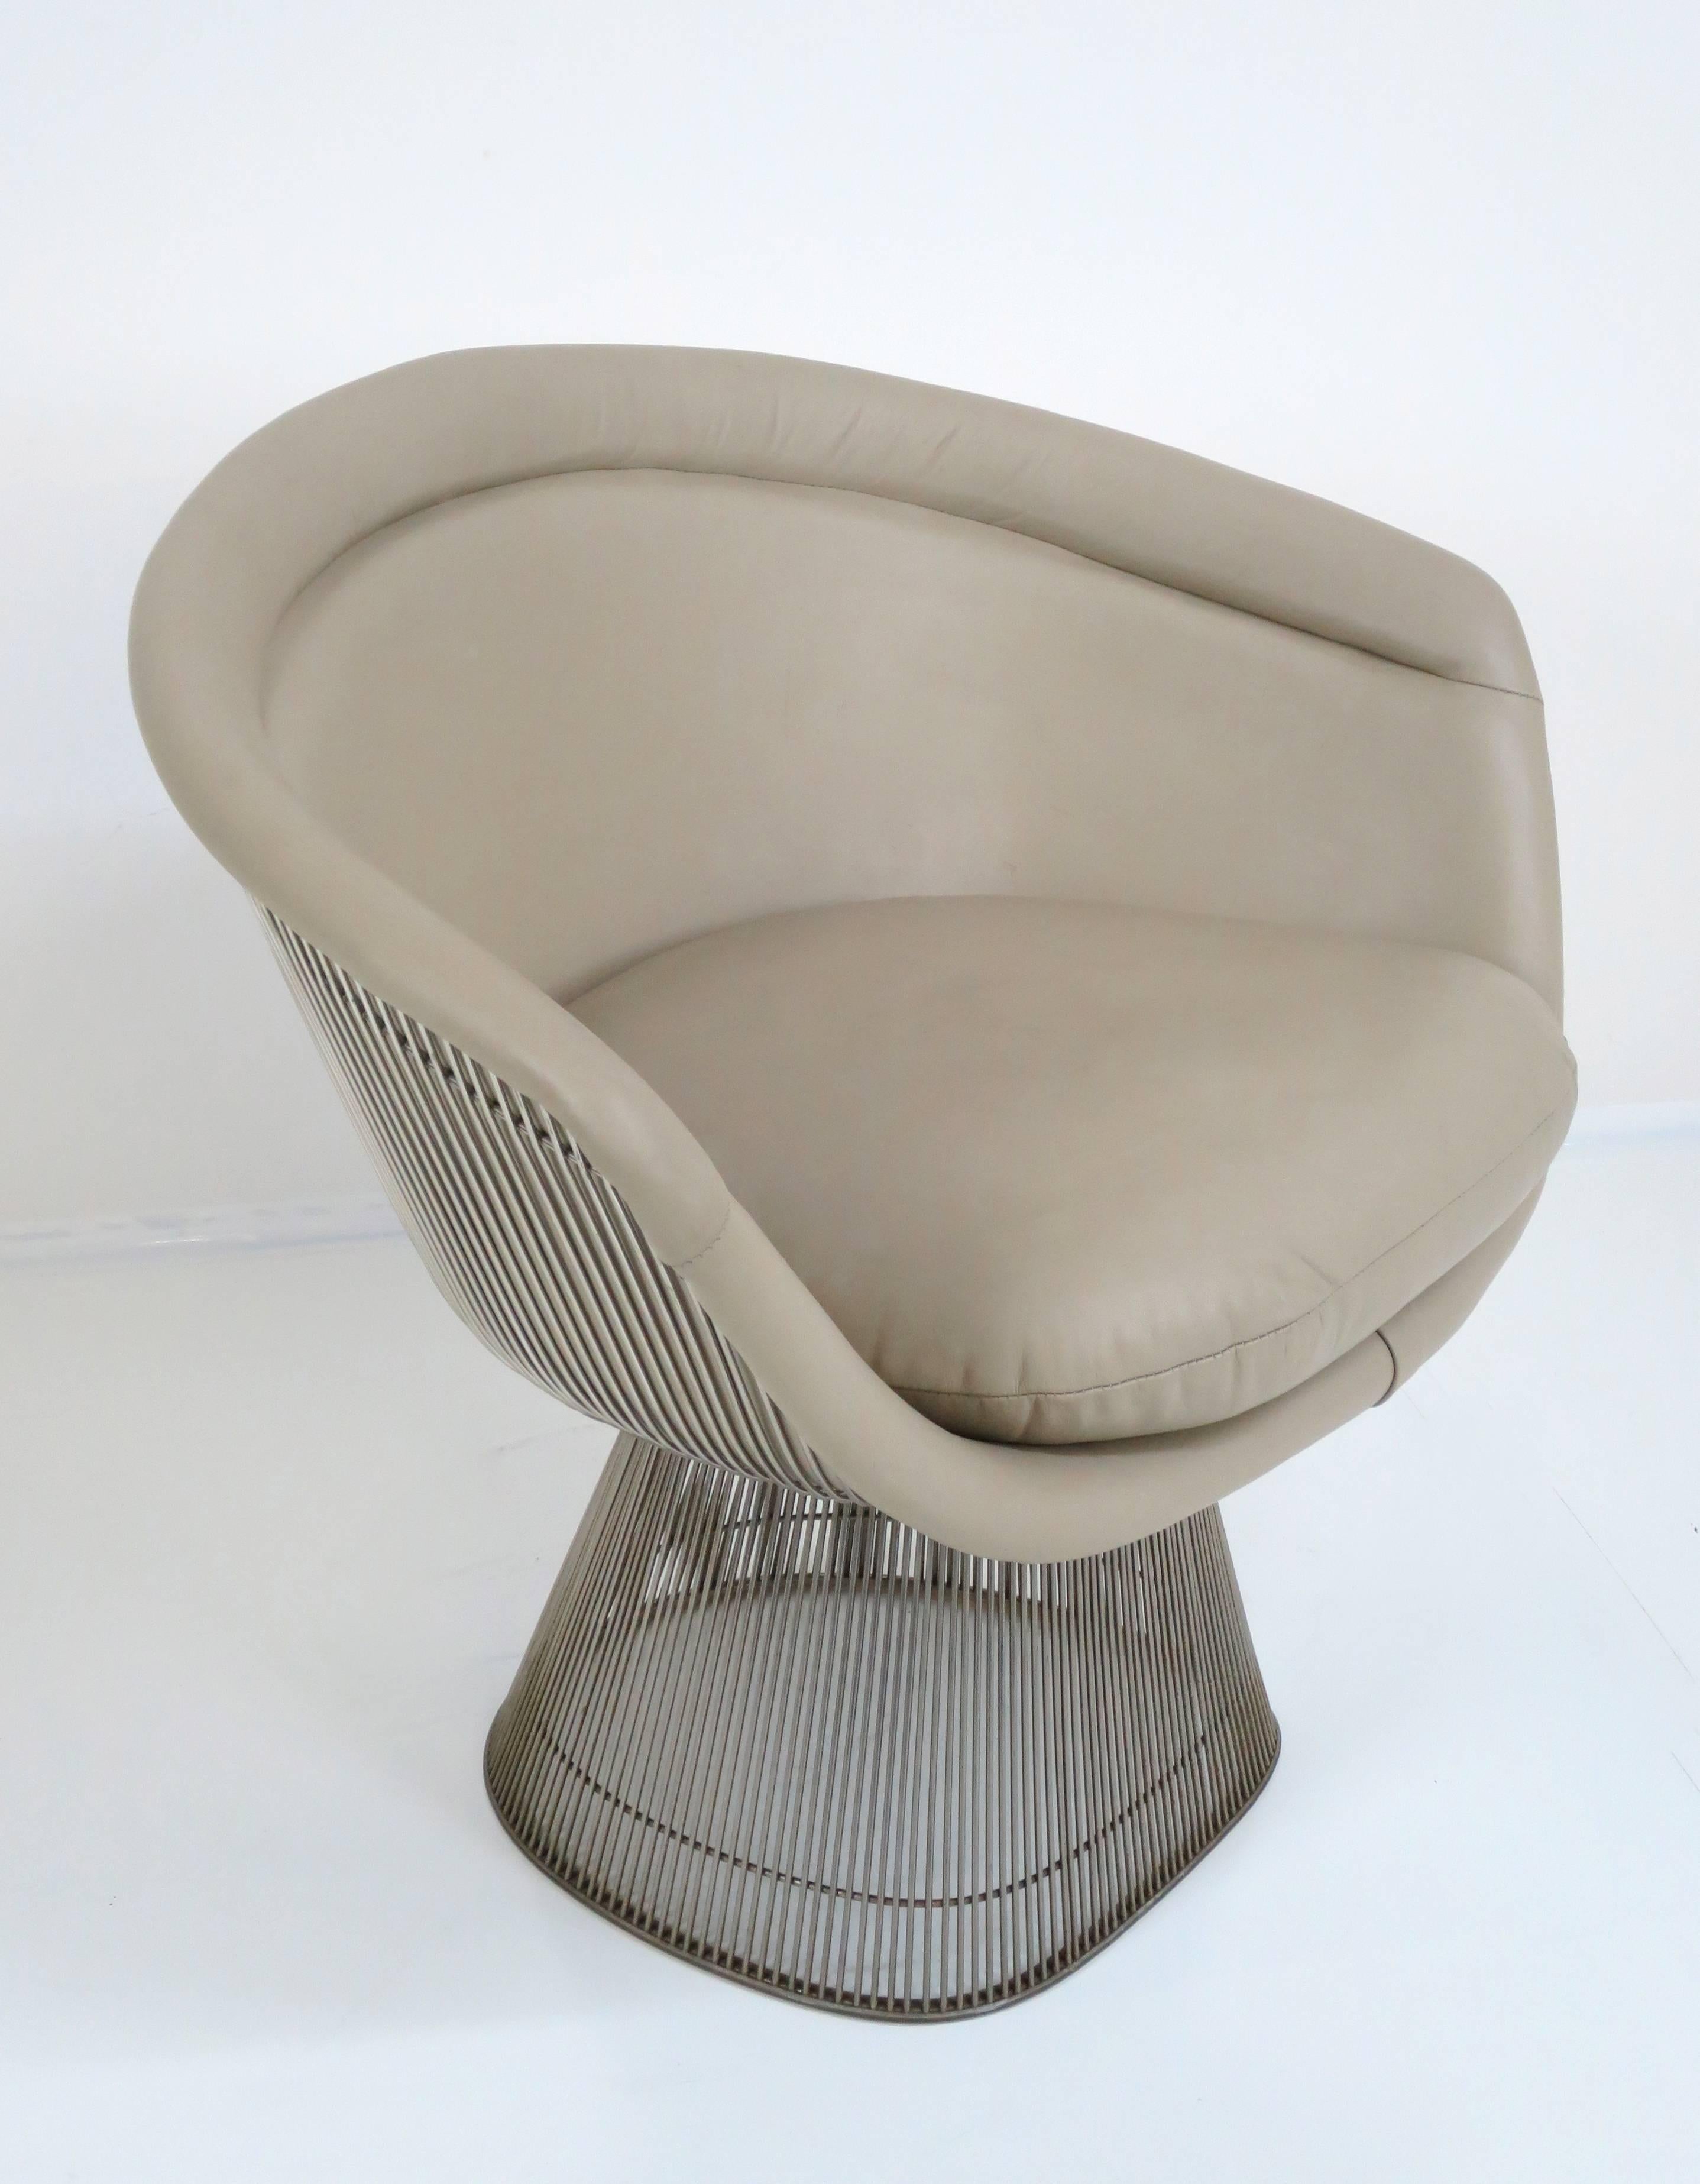 Chrome frame lounge chair in neutral leather by Warren Platner for Knoll Inc, circa 1960s. Original plastic, non-skid trim on bottom of chair is in very nice condition.